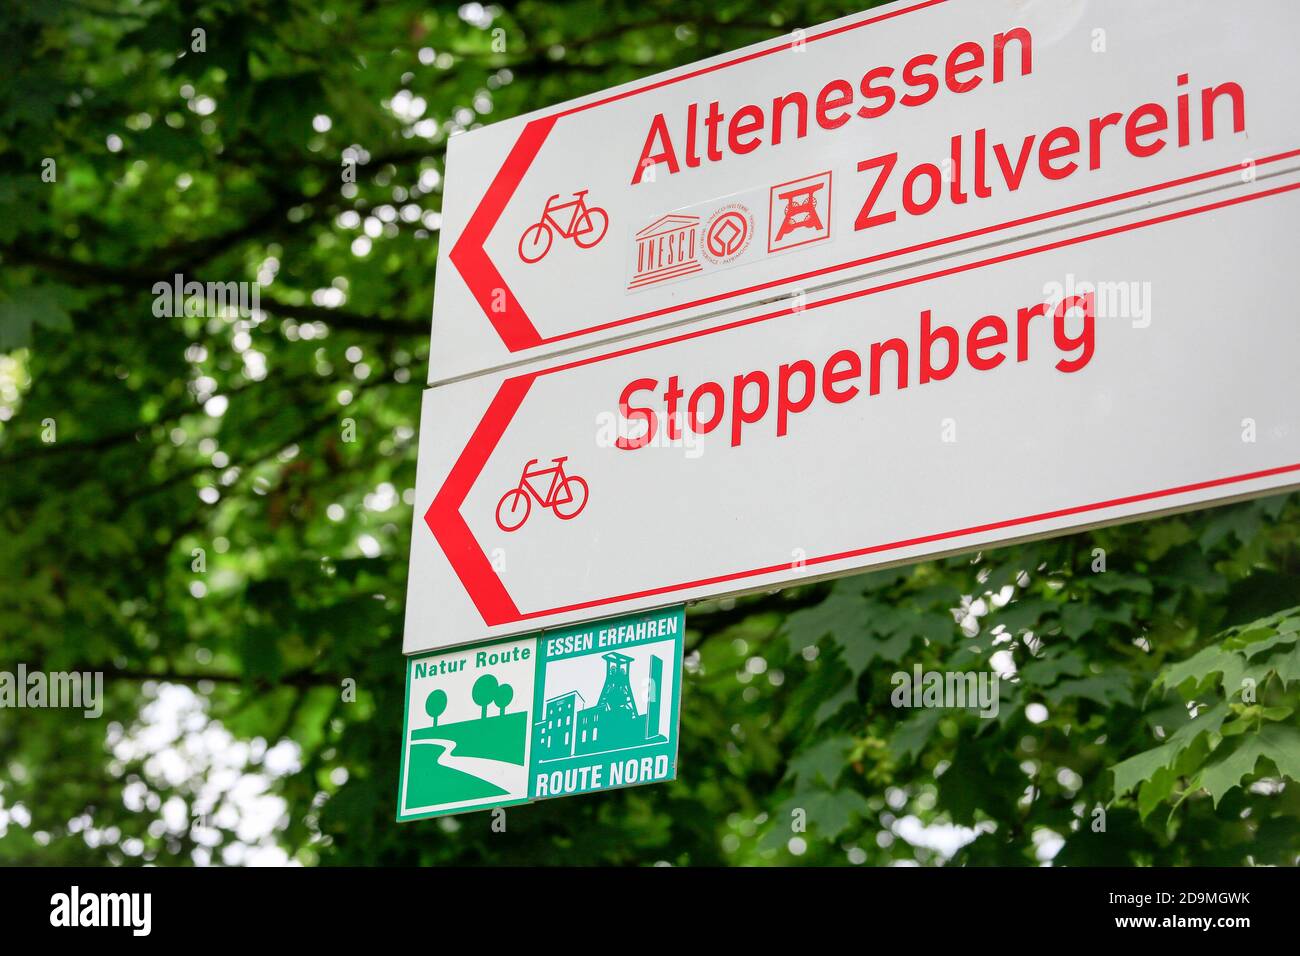 Essen, North Rhine-Westphalia, Ruhr Area, Germany, the Hallopark in the north of Essen is one of the oldest green areas in Essen, here signs on cycle paths towards Zollverein on the occasion of the Essen 2017 green capital of Europe. Stock Photo